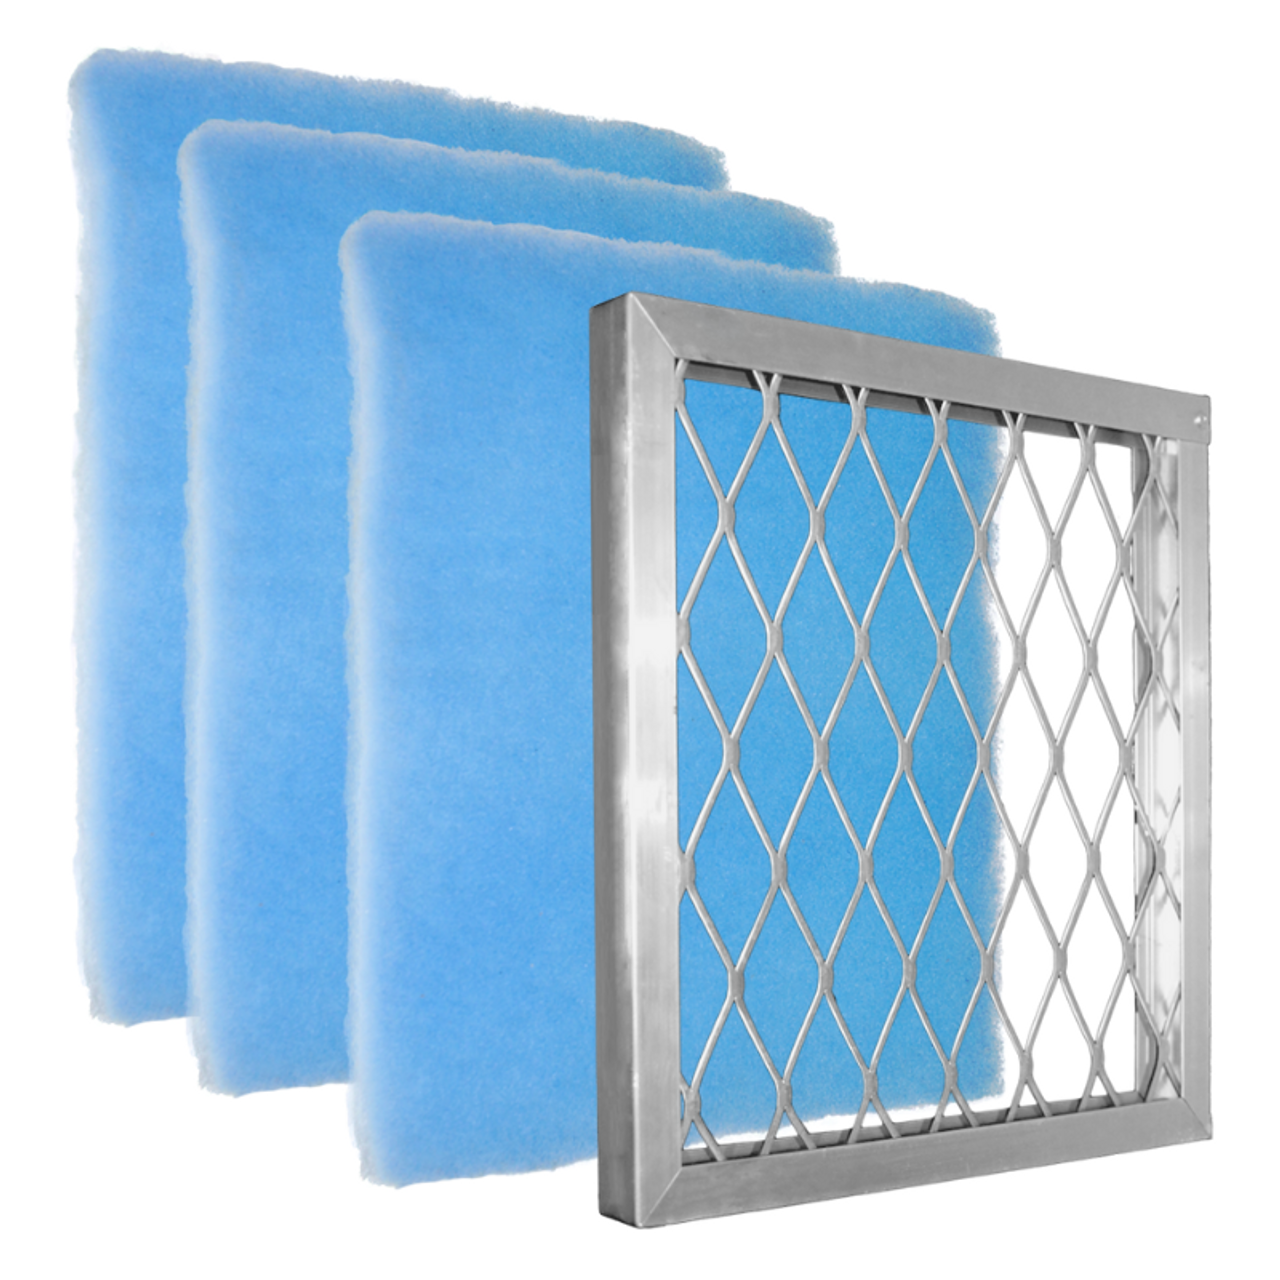 Starter Pack Blue Screen is an all in one bundle with Aluminum Frame and 3 Blue Screen air filters. Most affordable! The design of the Blue Screen has 2 zones which gives a higher dust-loading capacity than pleated with the Best Air Flow for the HVAC system. It does not have the anti-microbial and tackifier for allergies as the Green and Orange Screens. Often used for Commercial, Restaurant, Retail locations.  The air filters are pre-cut to size.    Comparable to MERV 7